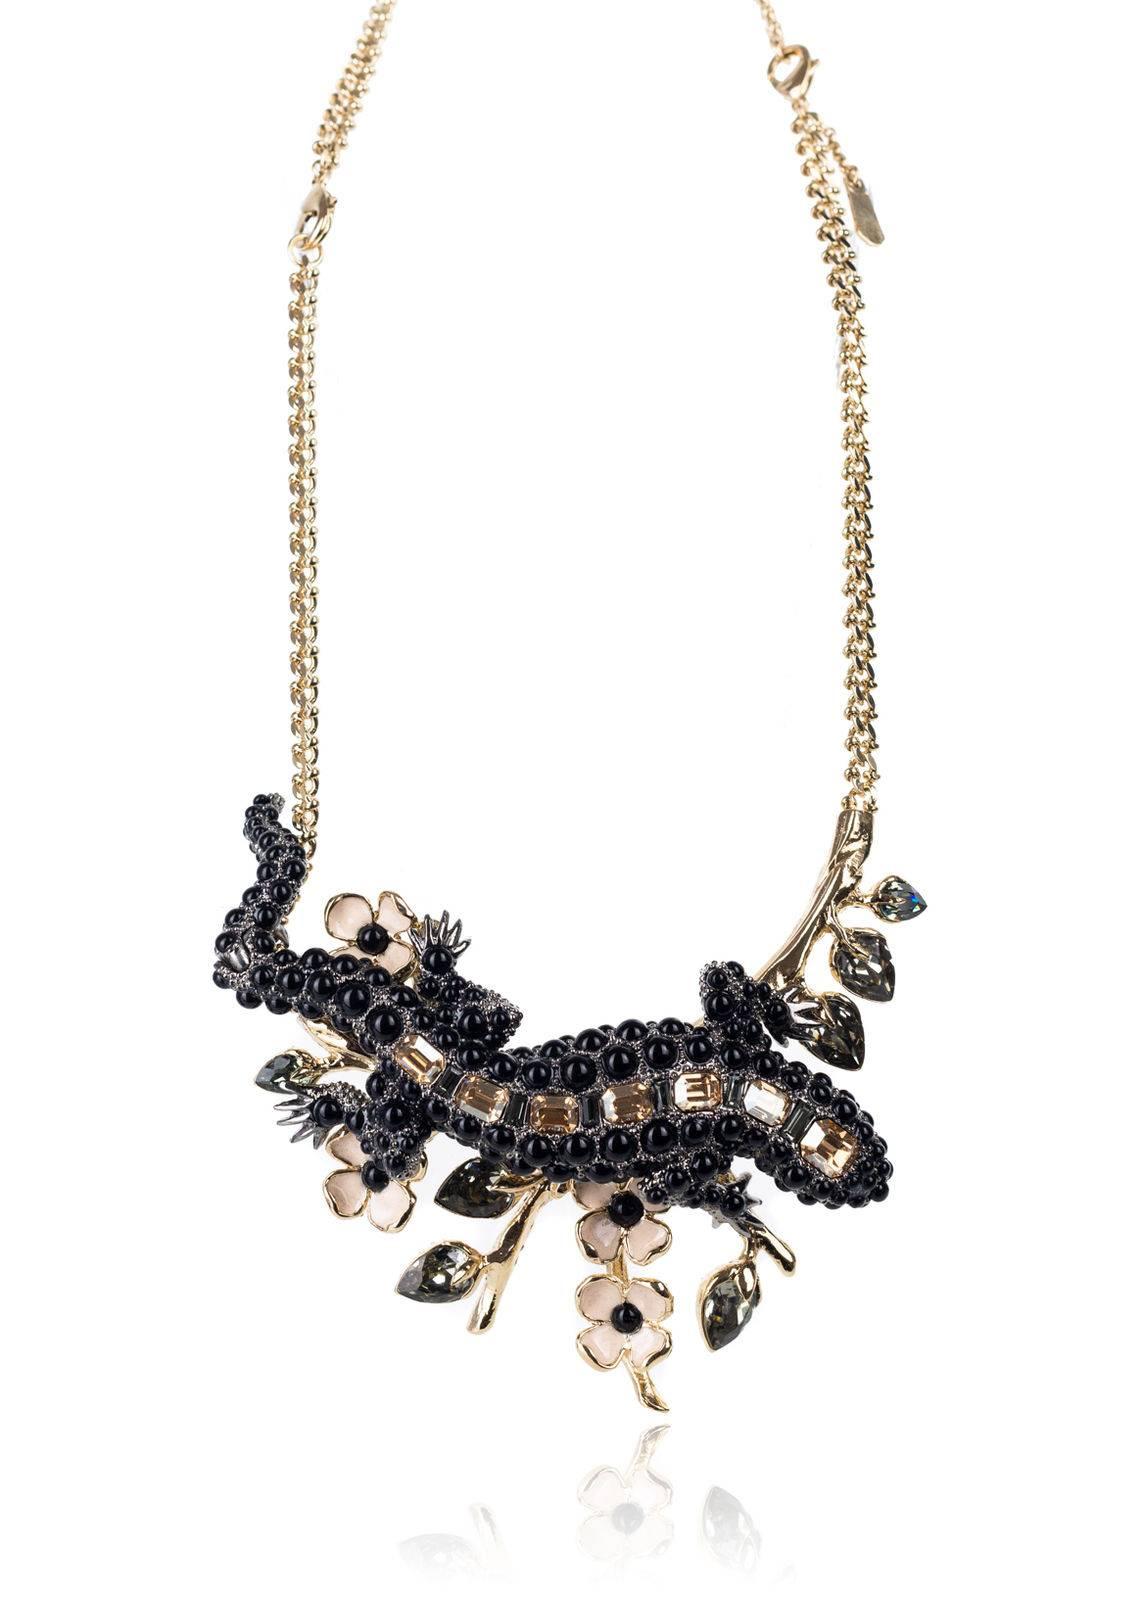 Gray Roberto Cavalli Gold Plated Embellished Black Lizard Statement Necklace For Sale